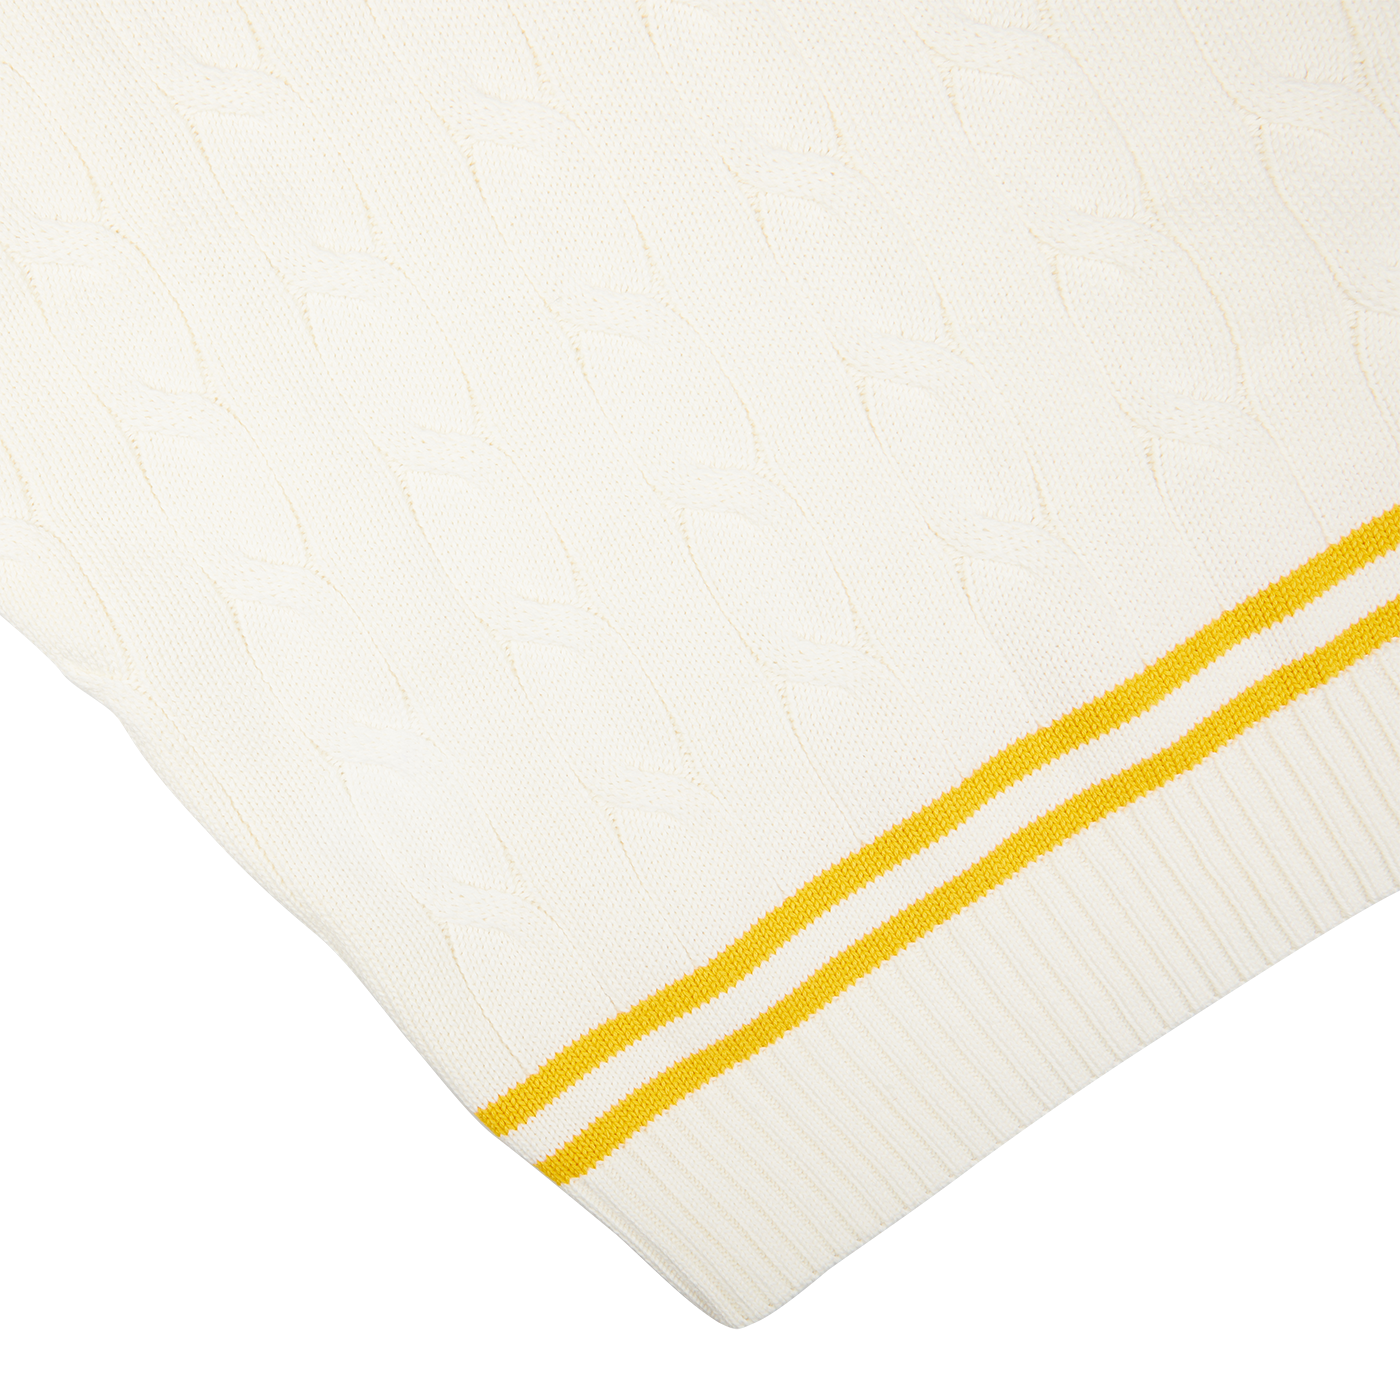 A close-up of a Off-White Yellow Striped Cotton Cricket Slipover fabric from Alan Paine with yellow stripes on the edge.